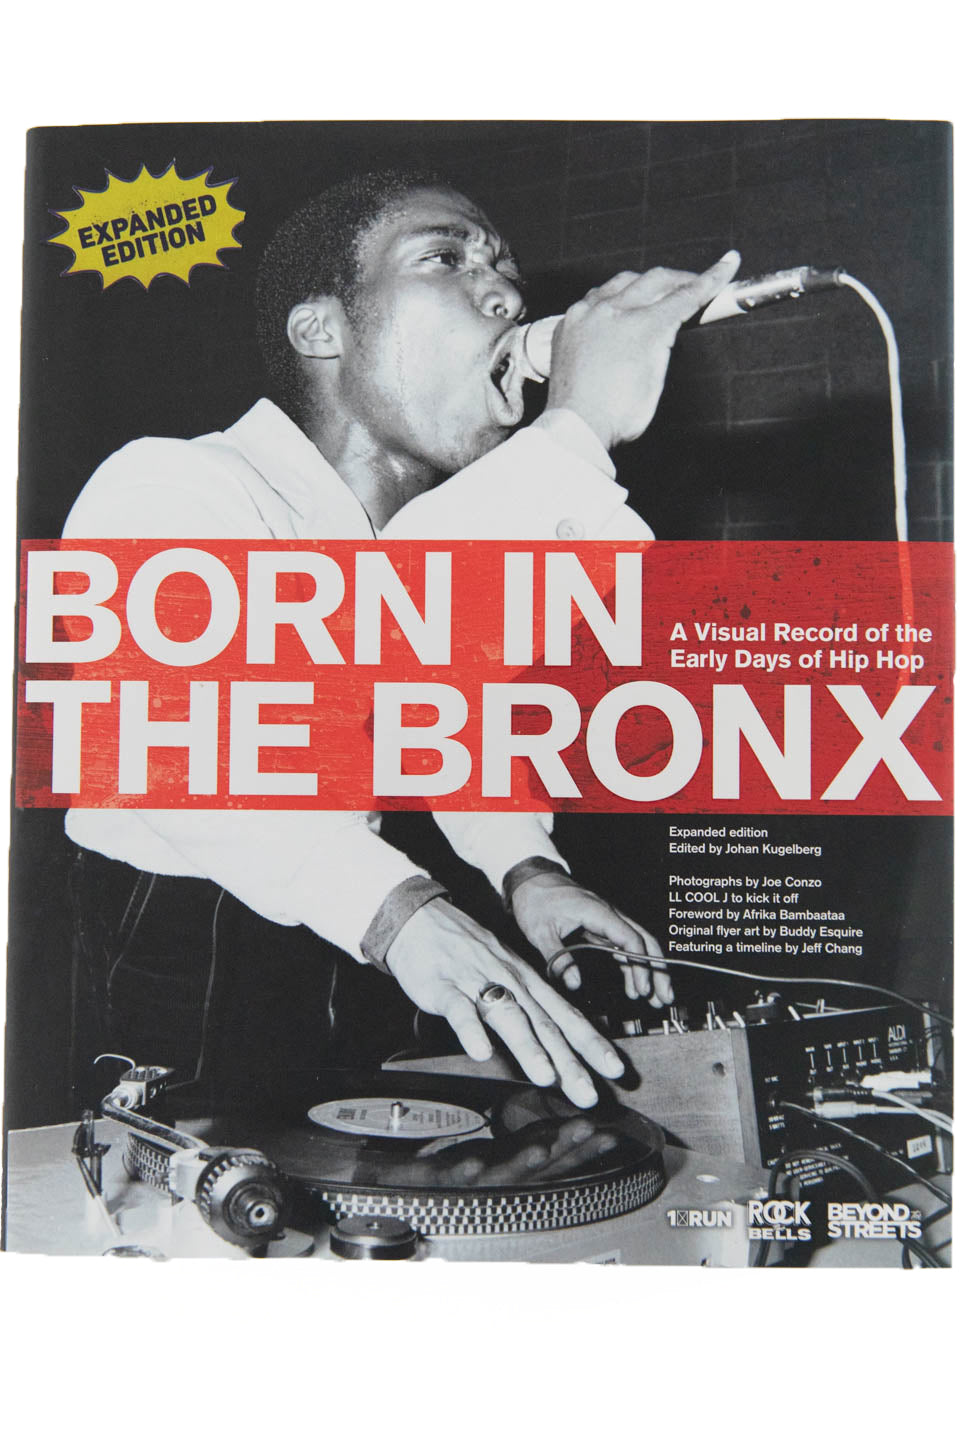 BORN IN THE BRONX | A Visual Record of the Early Days of Hip Hop